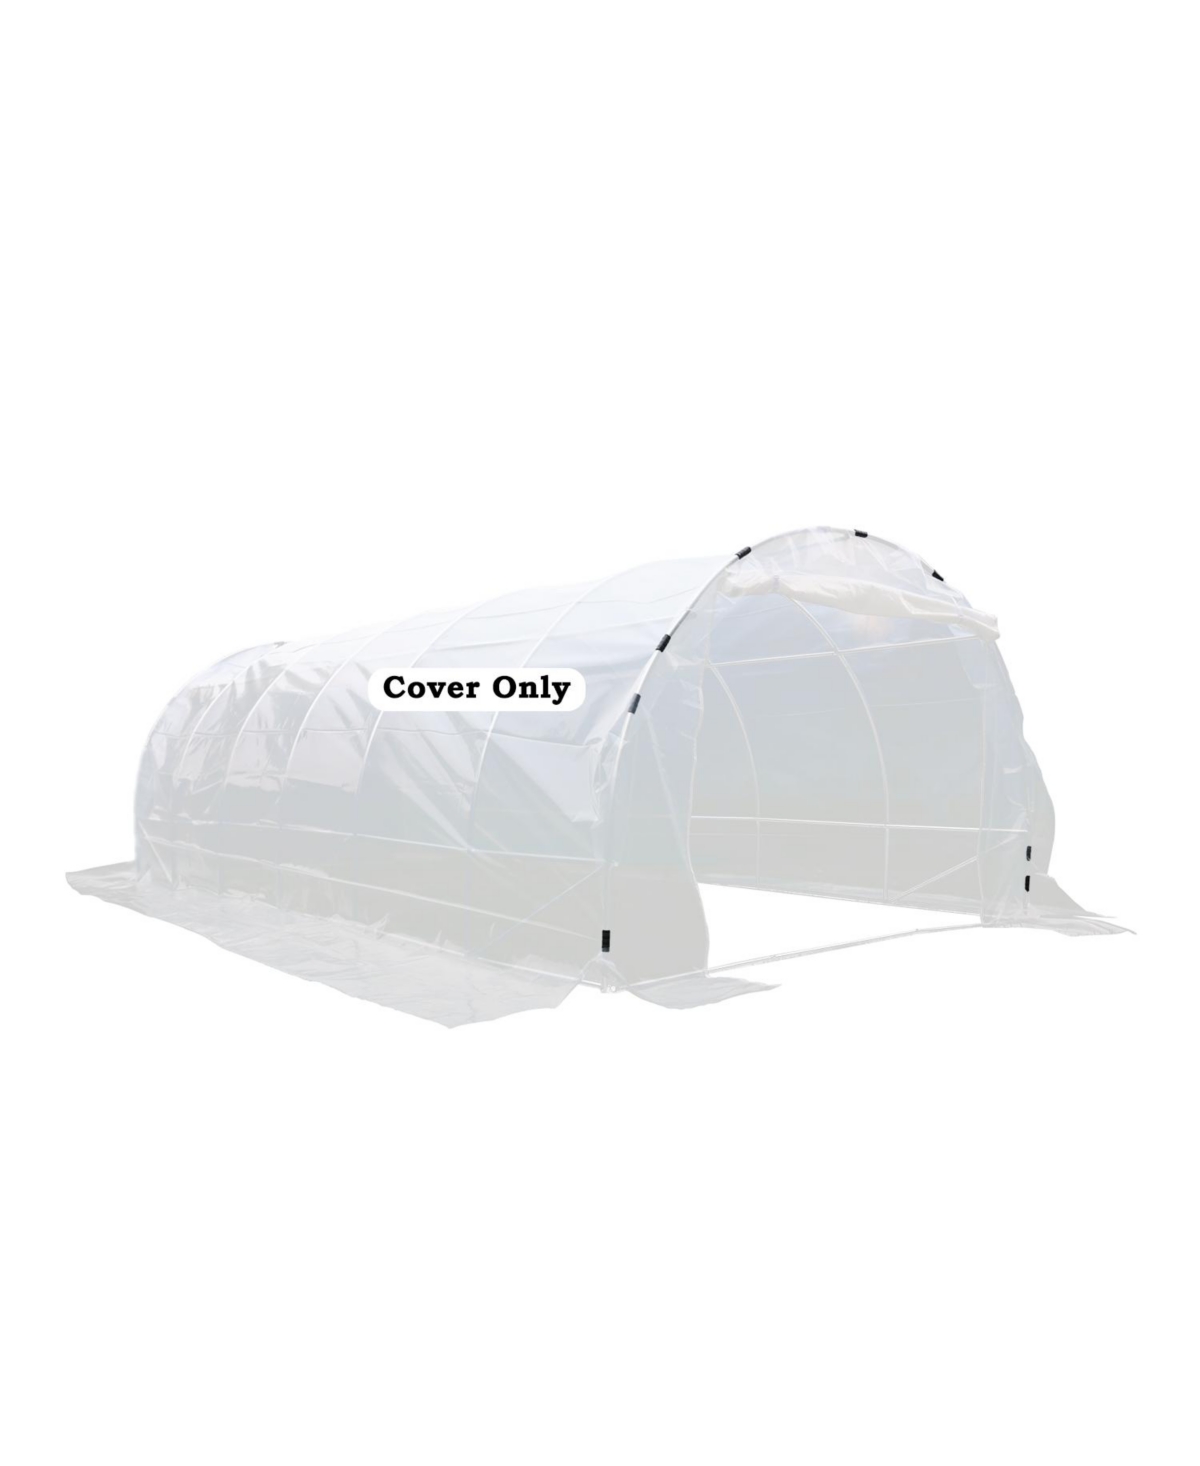 20' x 10' x 6.6' Greenhouse Cover - Uv, Low Temperature Resistant, Waterproof, Durable Pe Plastic Sheet - White - White